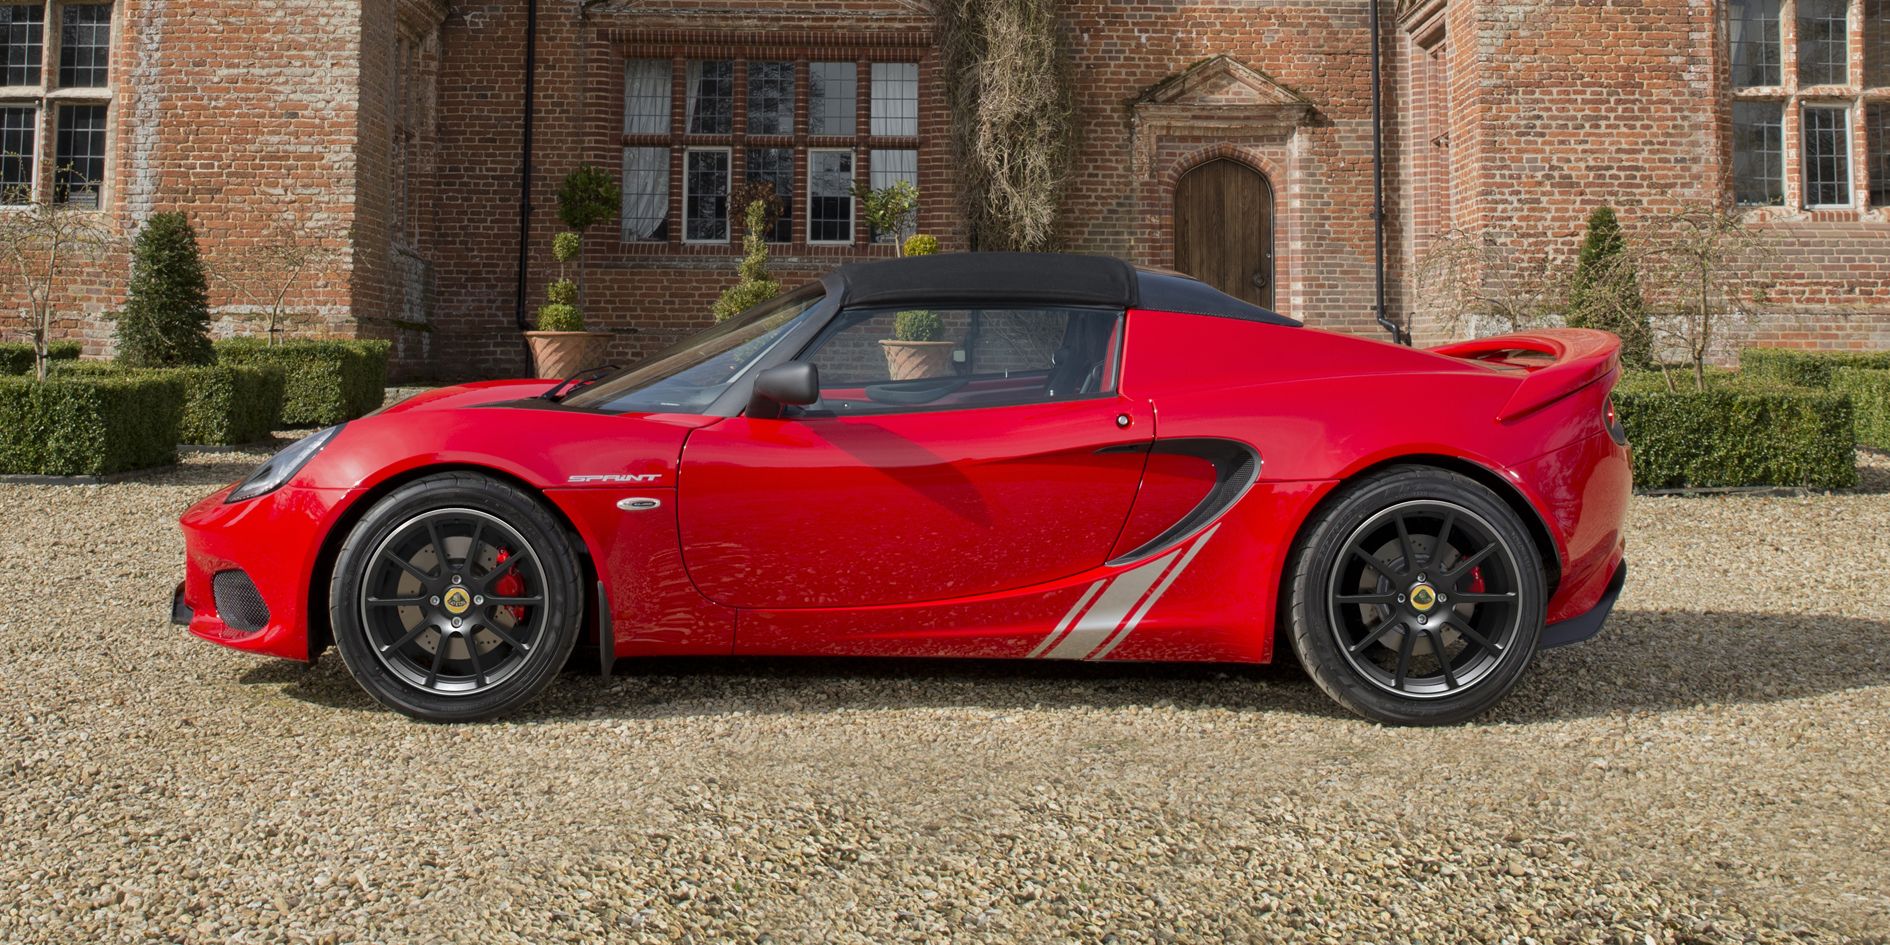 The Latest Lotus Elise Weighs 1759 lbs., Dry